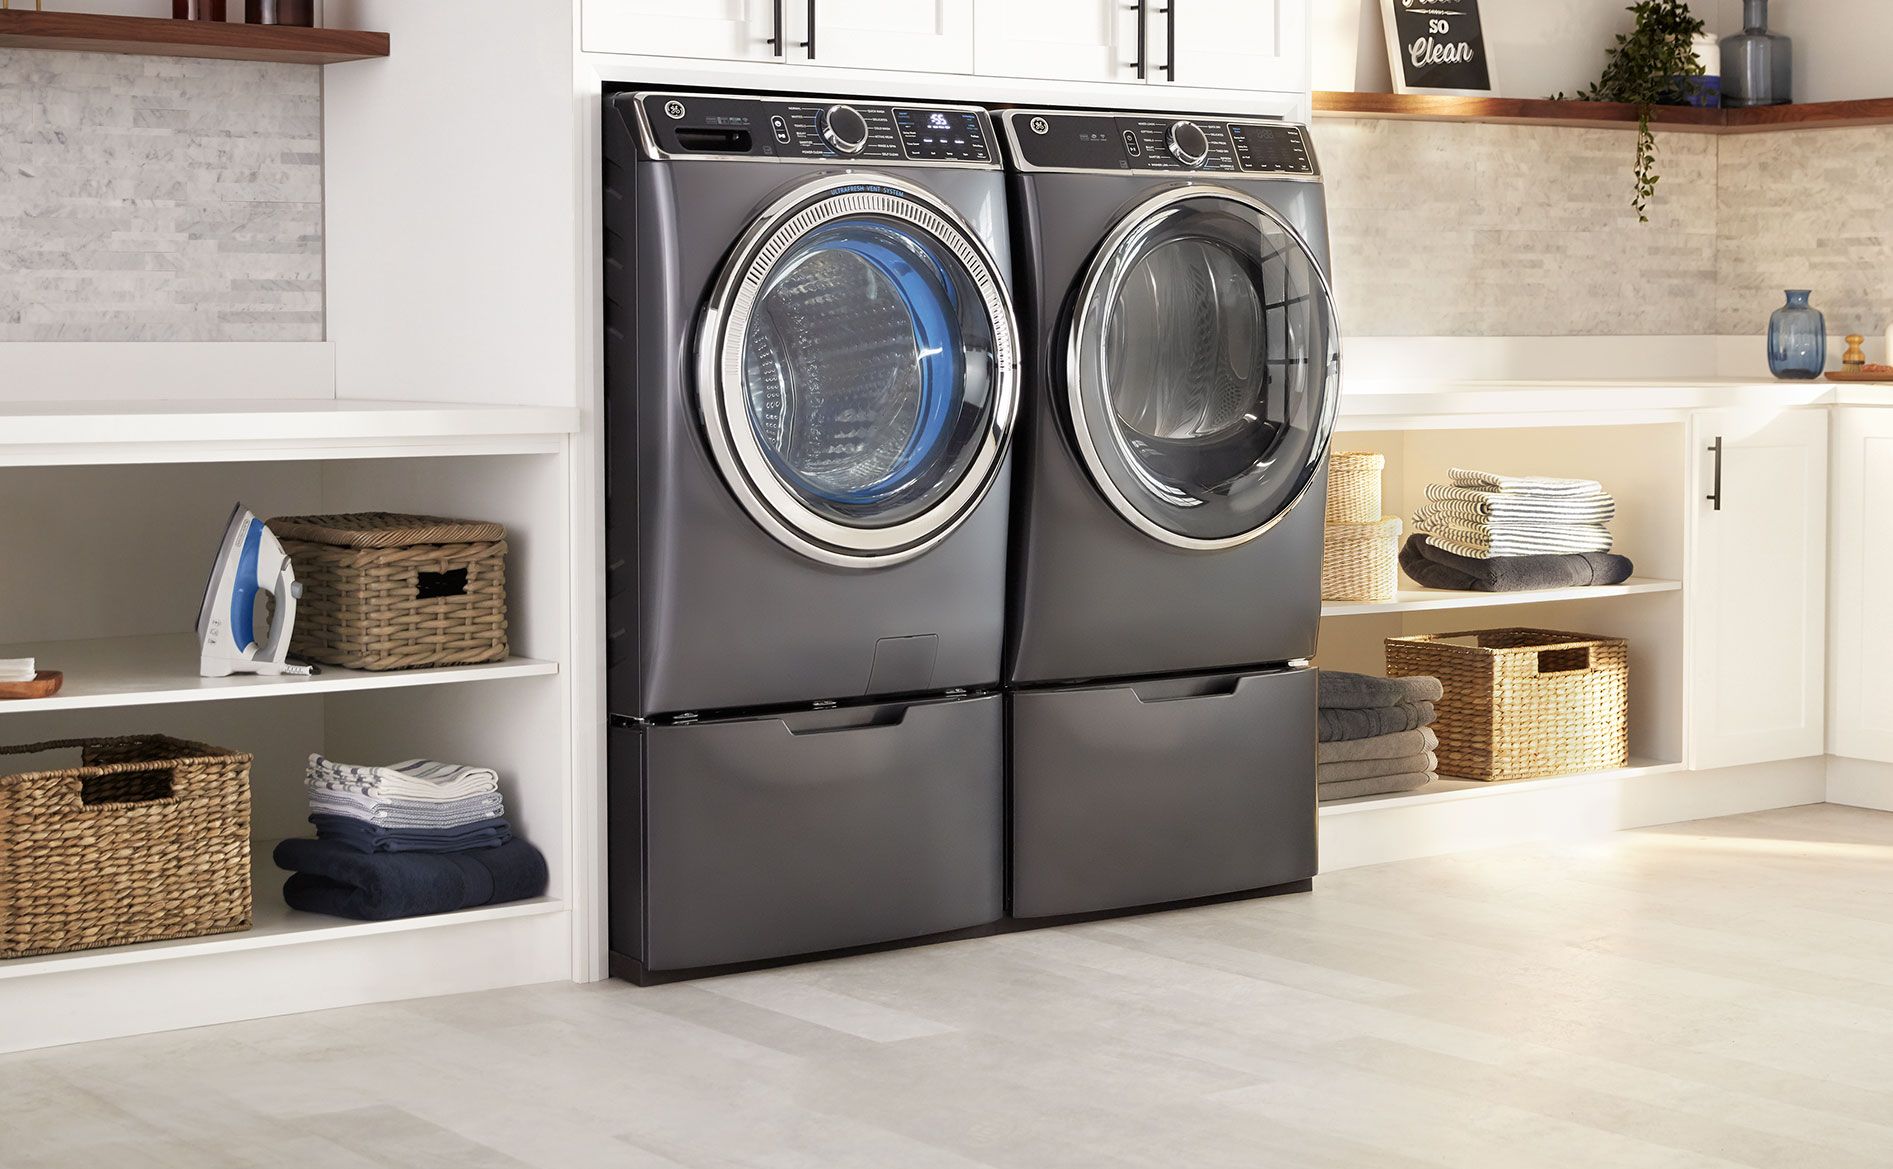 How Do I Stop My Stacked Washer From Moving?